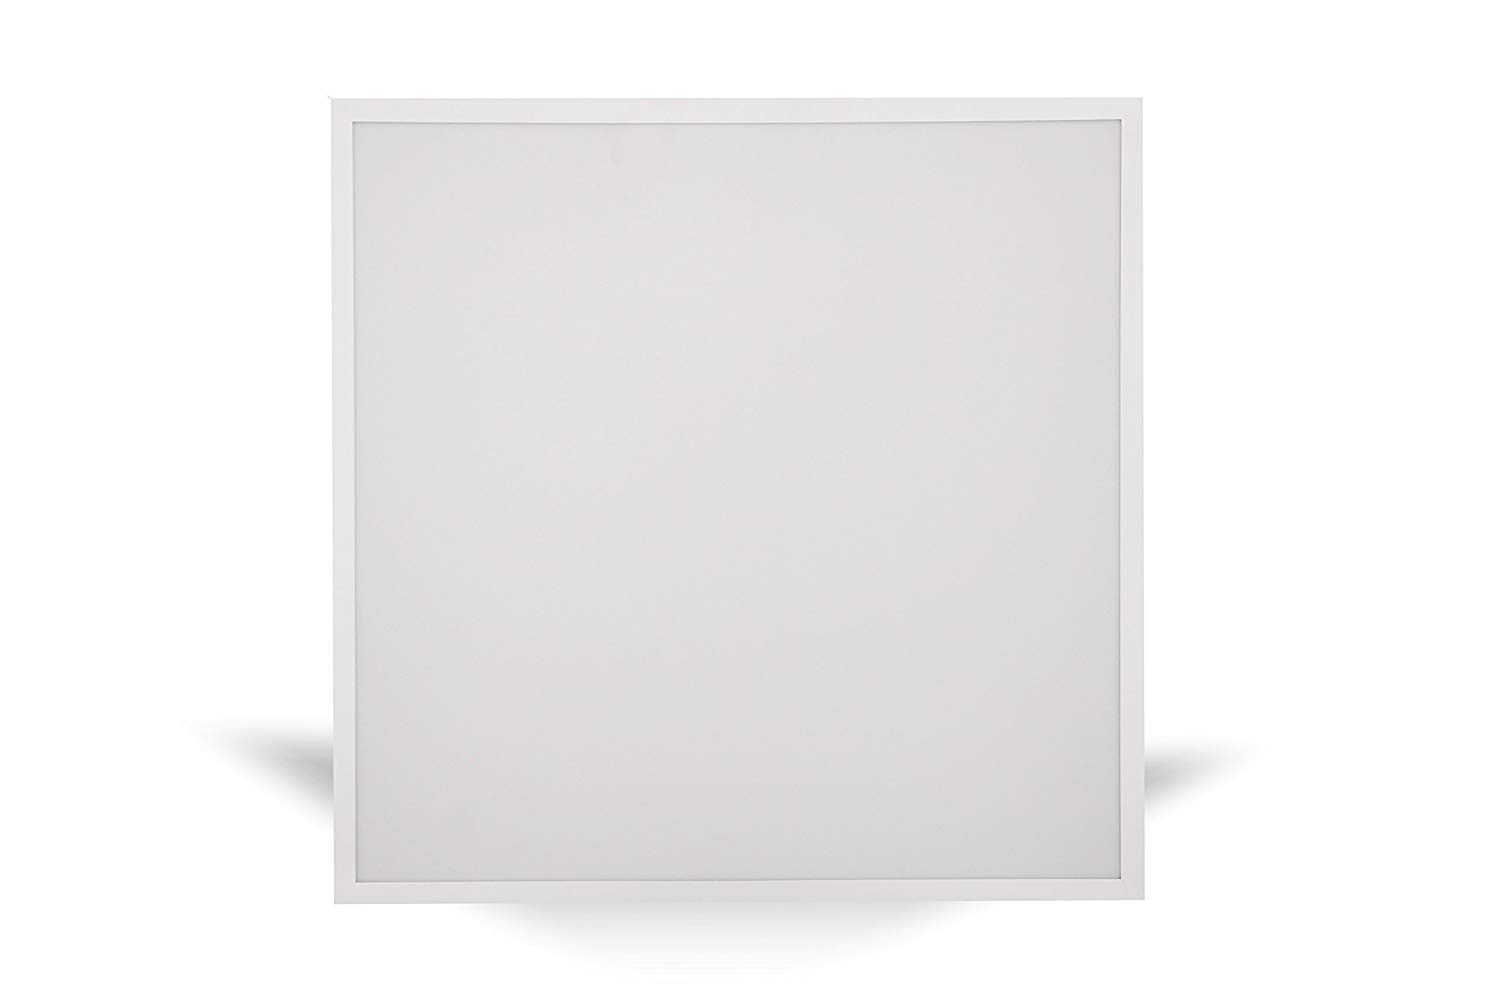 SYSKA LED SSK-PAB-6060B-3IN1-36W Led Panel Light 36W Back Light Armstrong 2' X 2' 3IN1